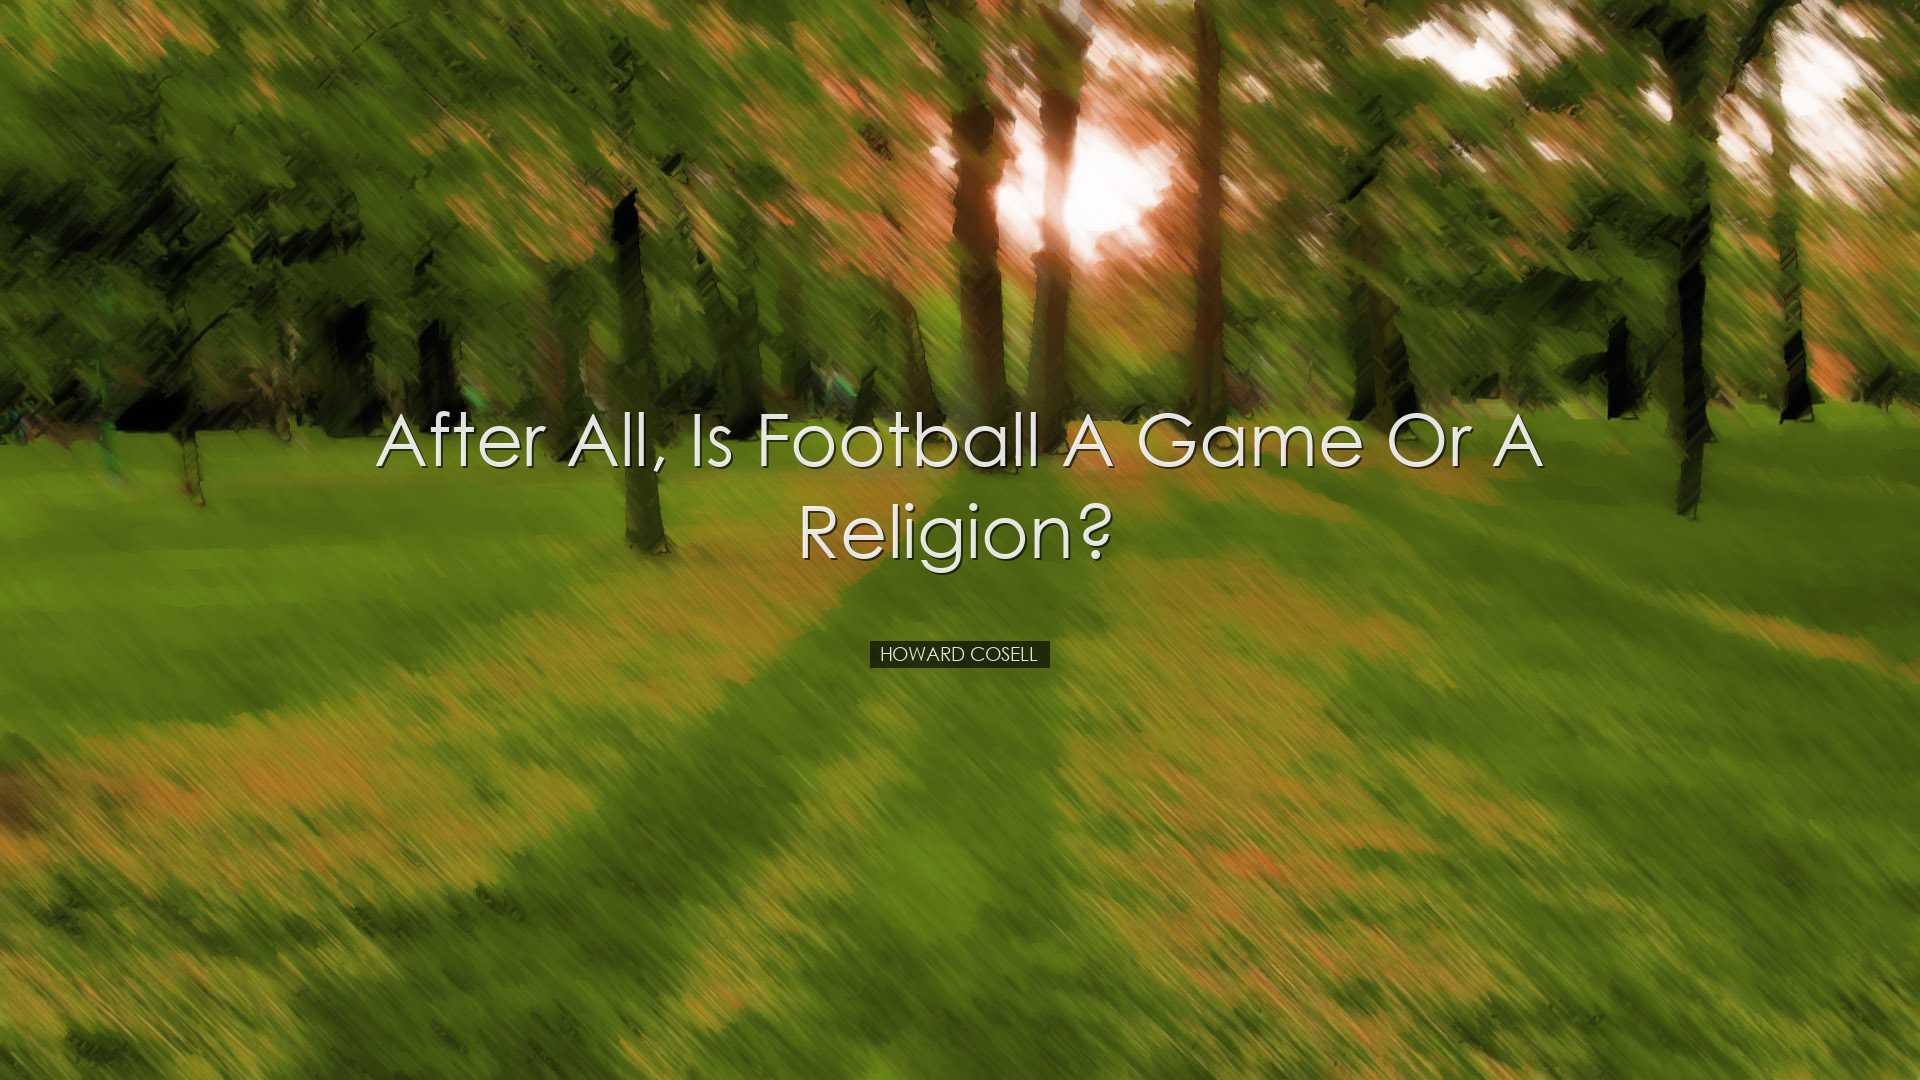 After all, is football a game or a religion? - Howard Cosell